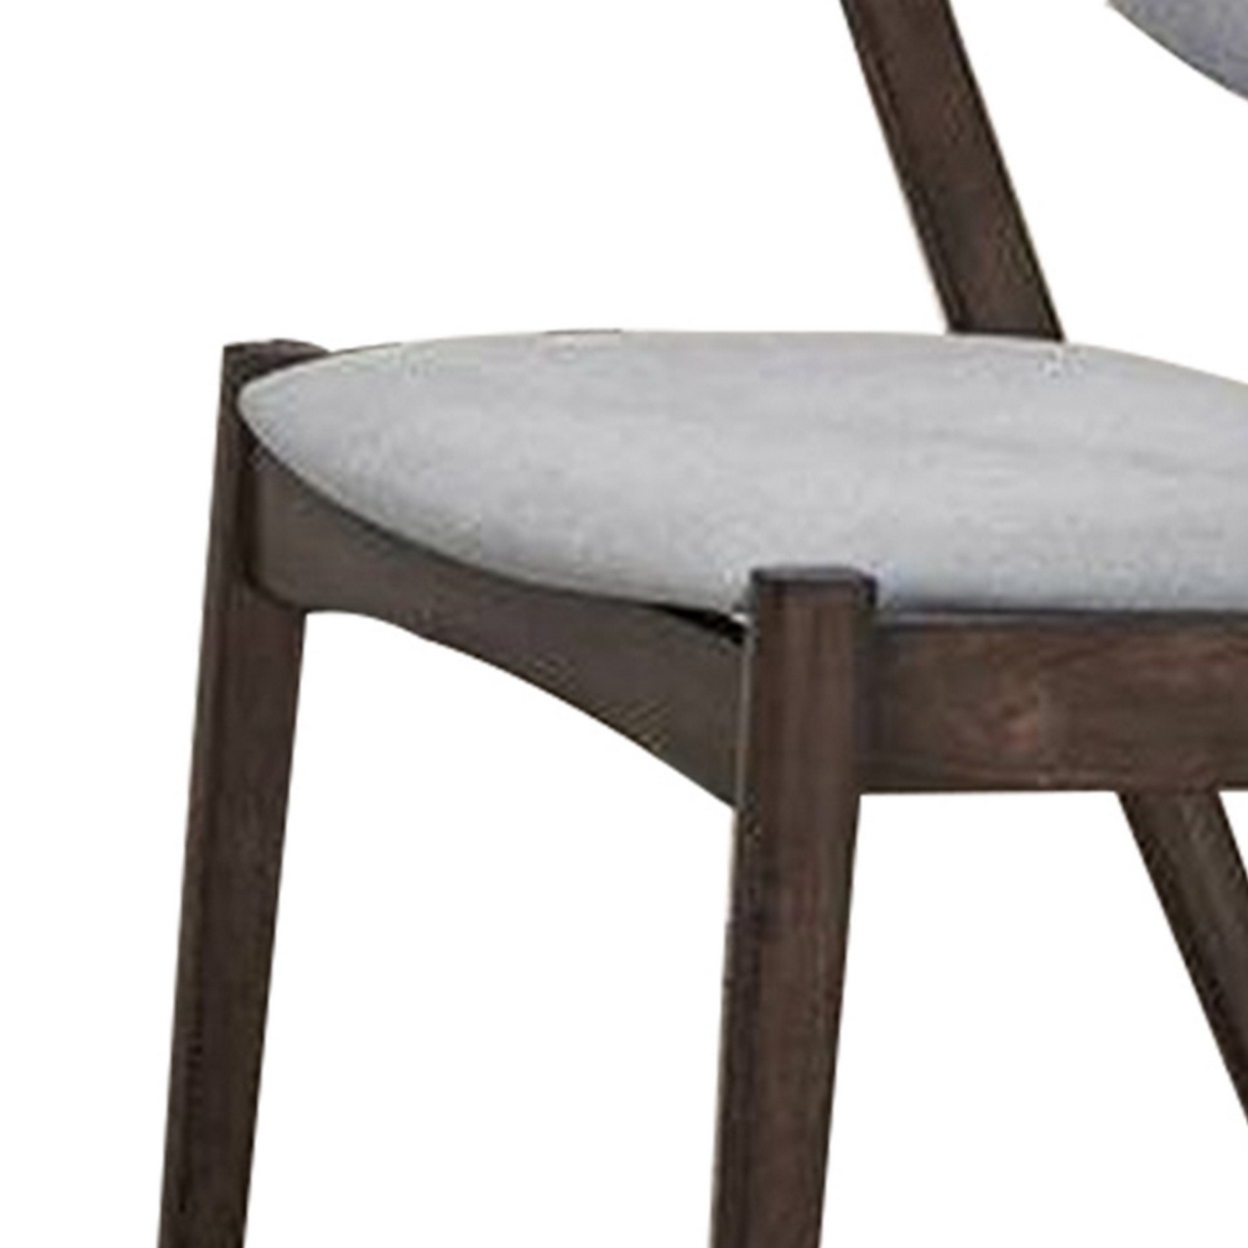 18 Inch Modern Wood Dining Chair, Set Of 2, Angled Arms, Backrest, Gray